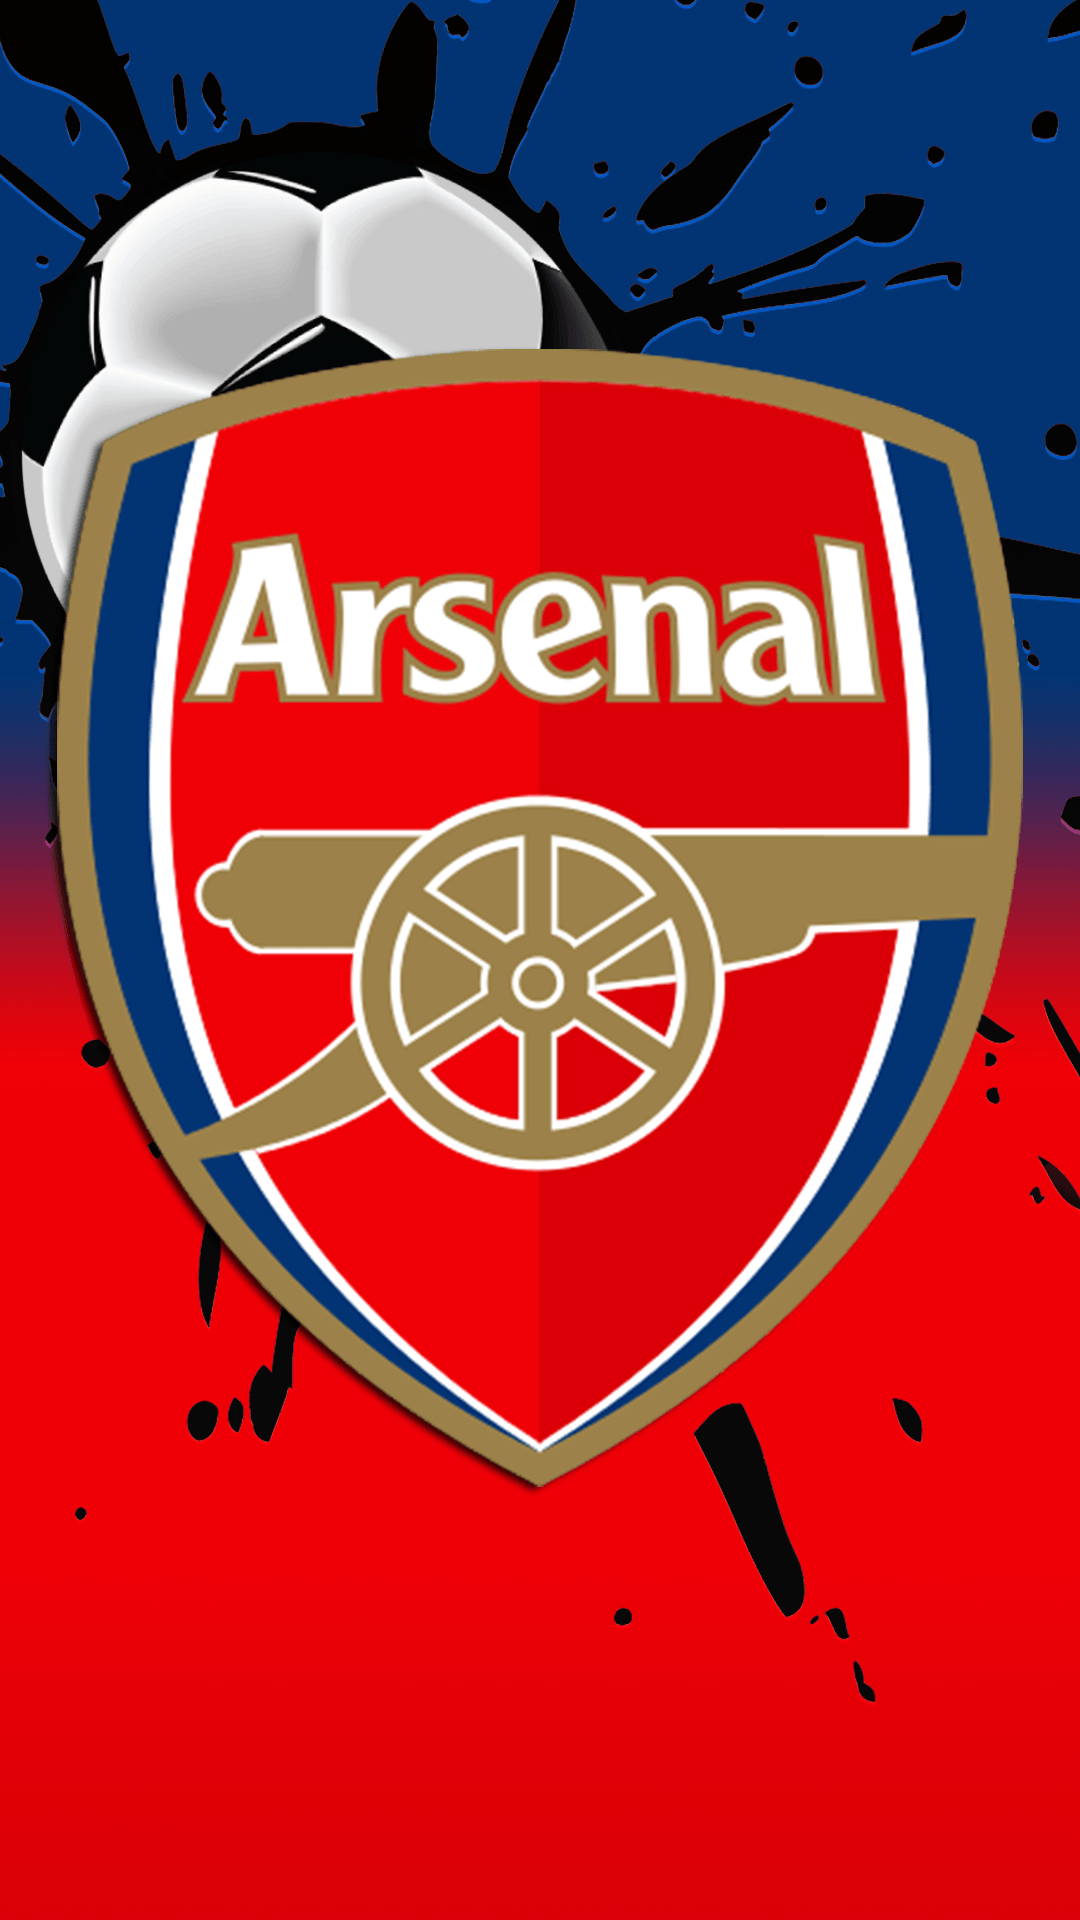 Free HD Arsenal Fc iPhone Wallpaper For Download .0013